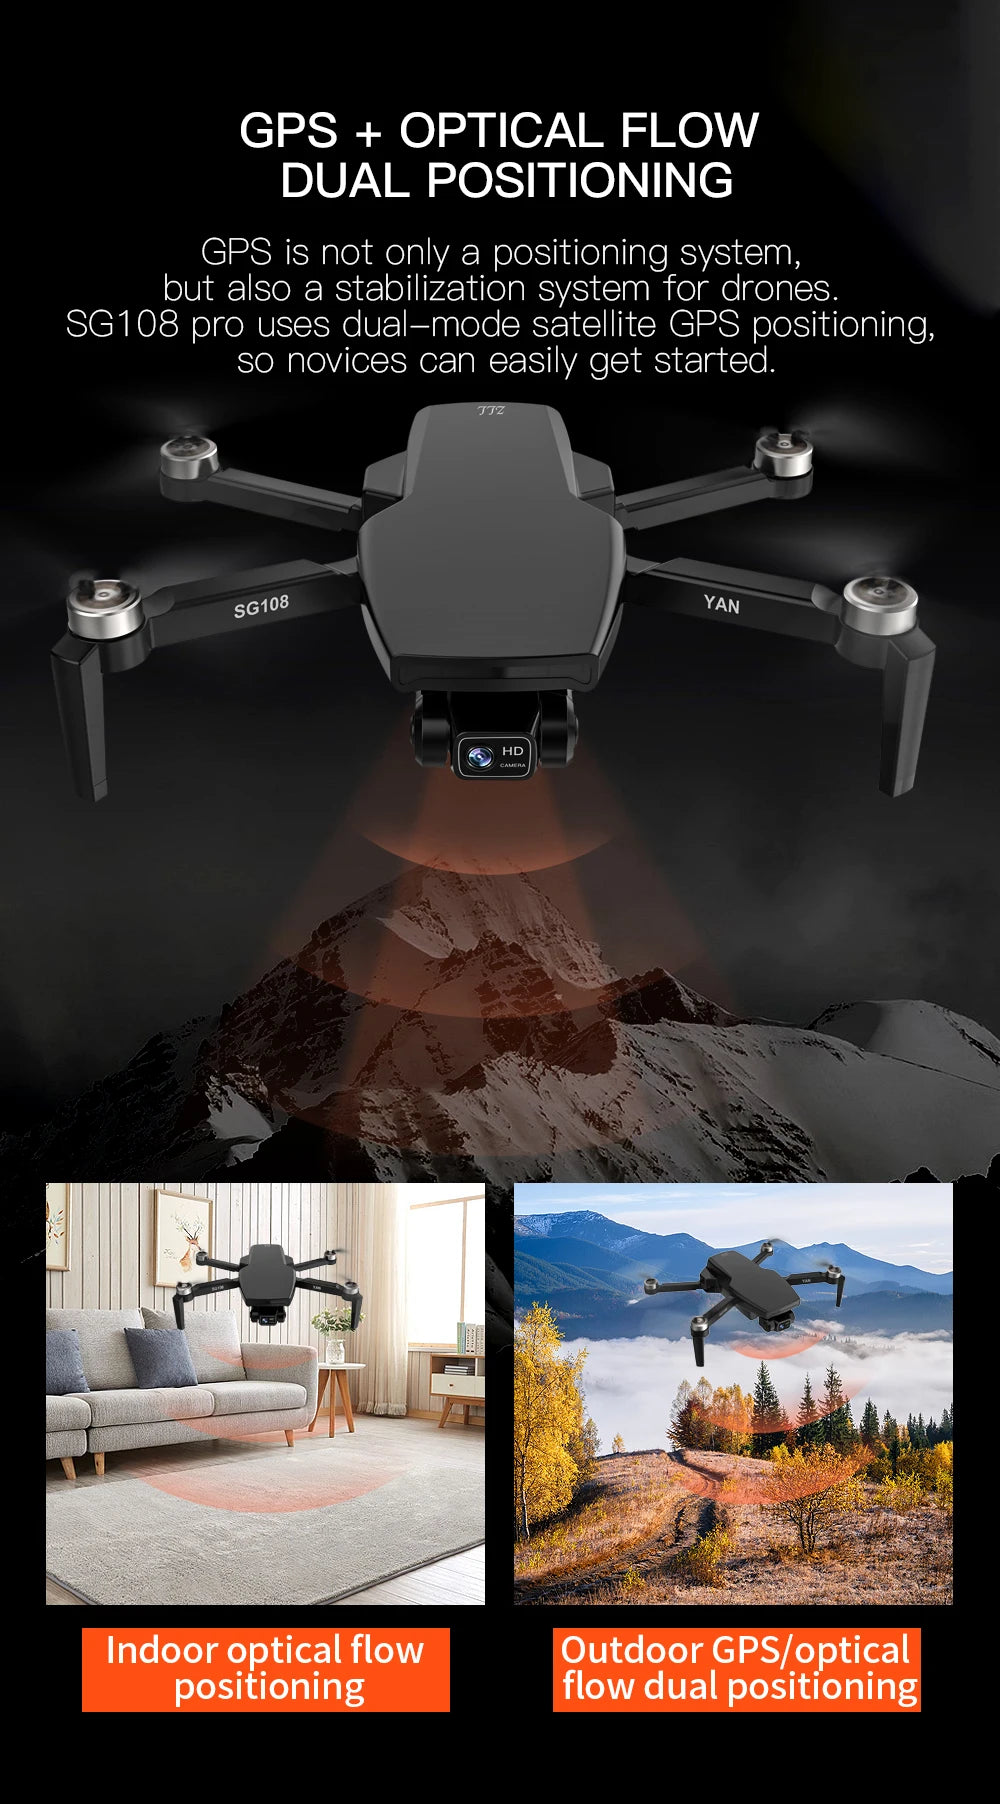 G108 Pro MAx Drone, GPS OPTICAL FLOW DUAL POSITIONING GPS is not only a